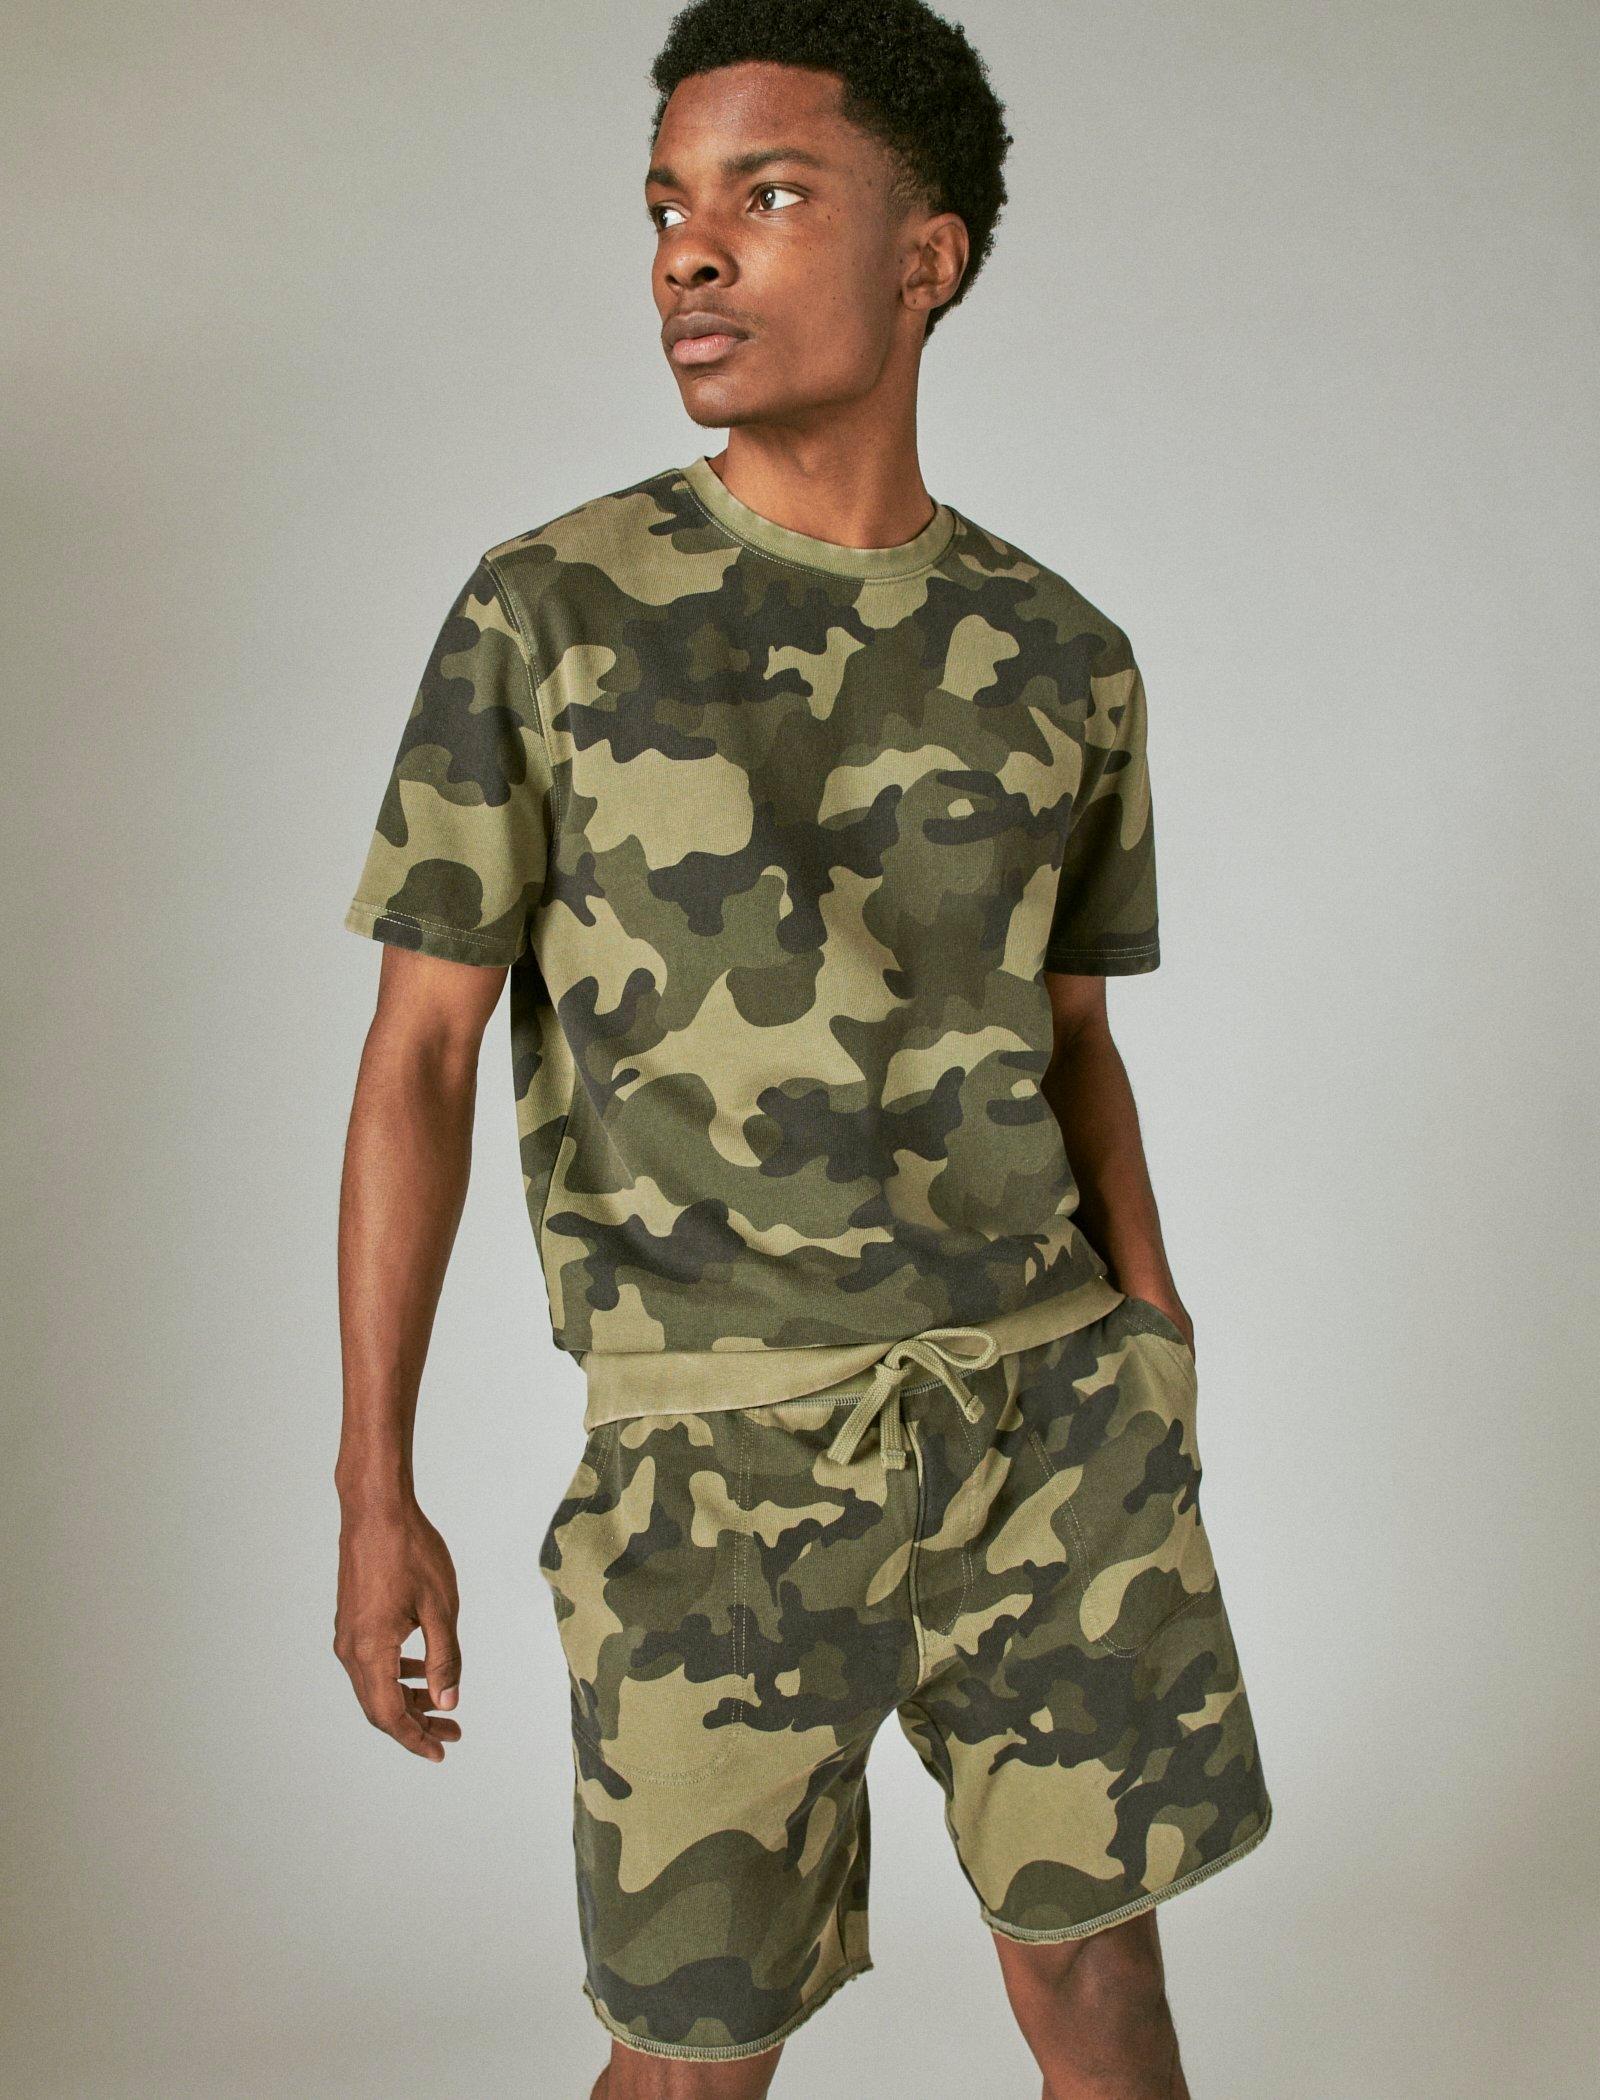 Lucky Brand Sueded Terry Short Sleeve Camo Crew Camo (Army Colors)